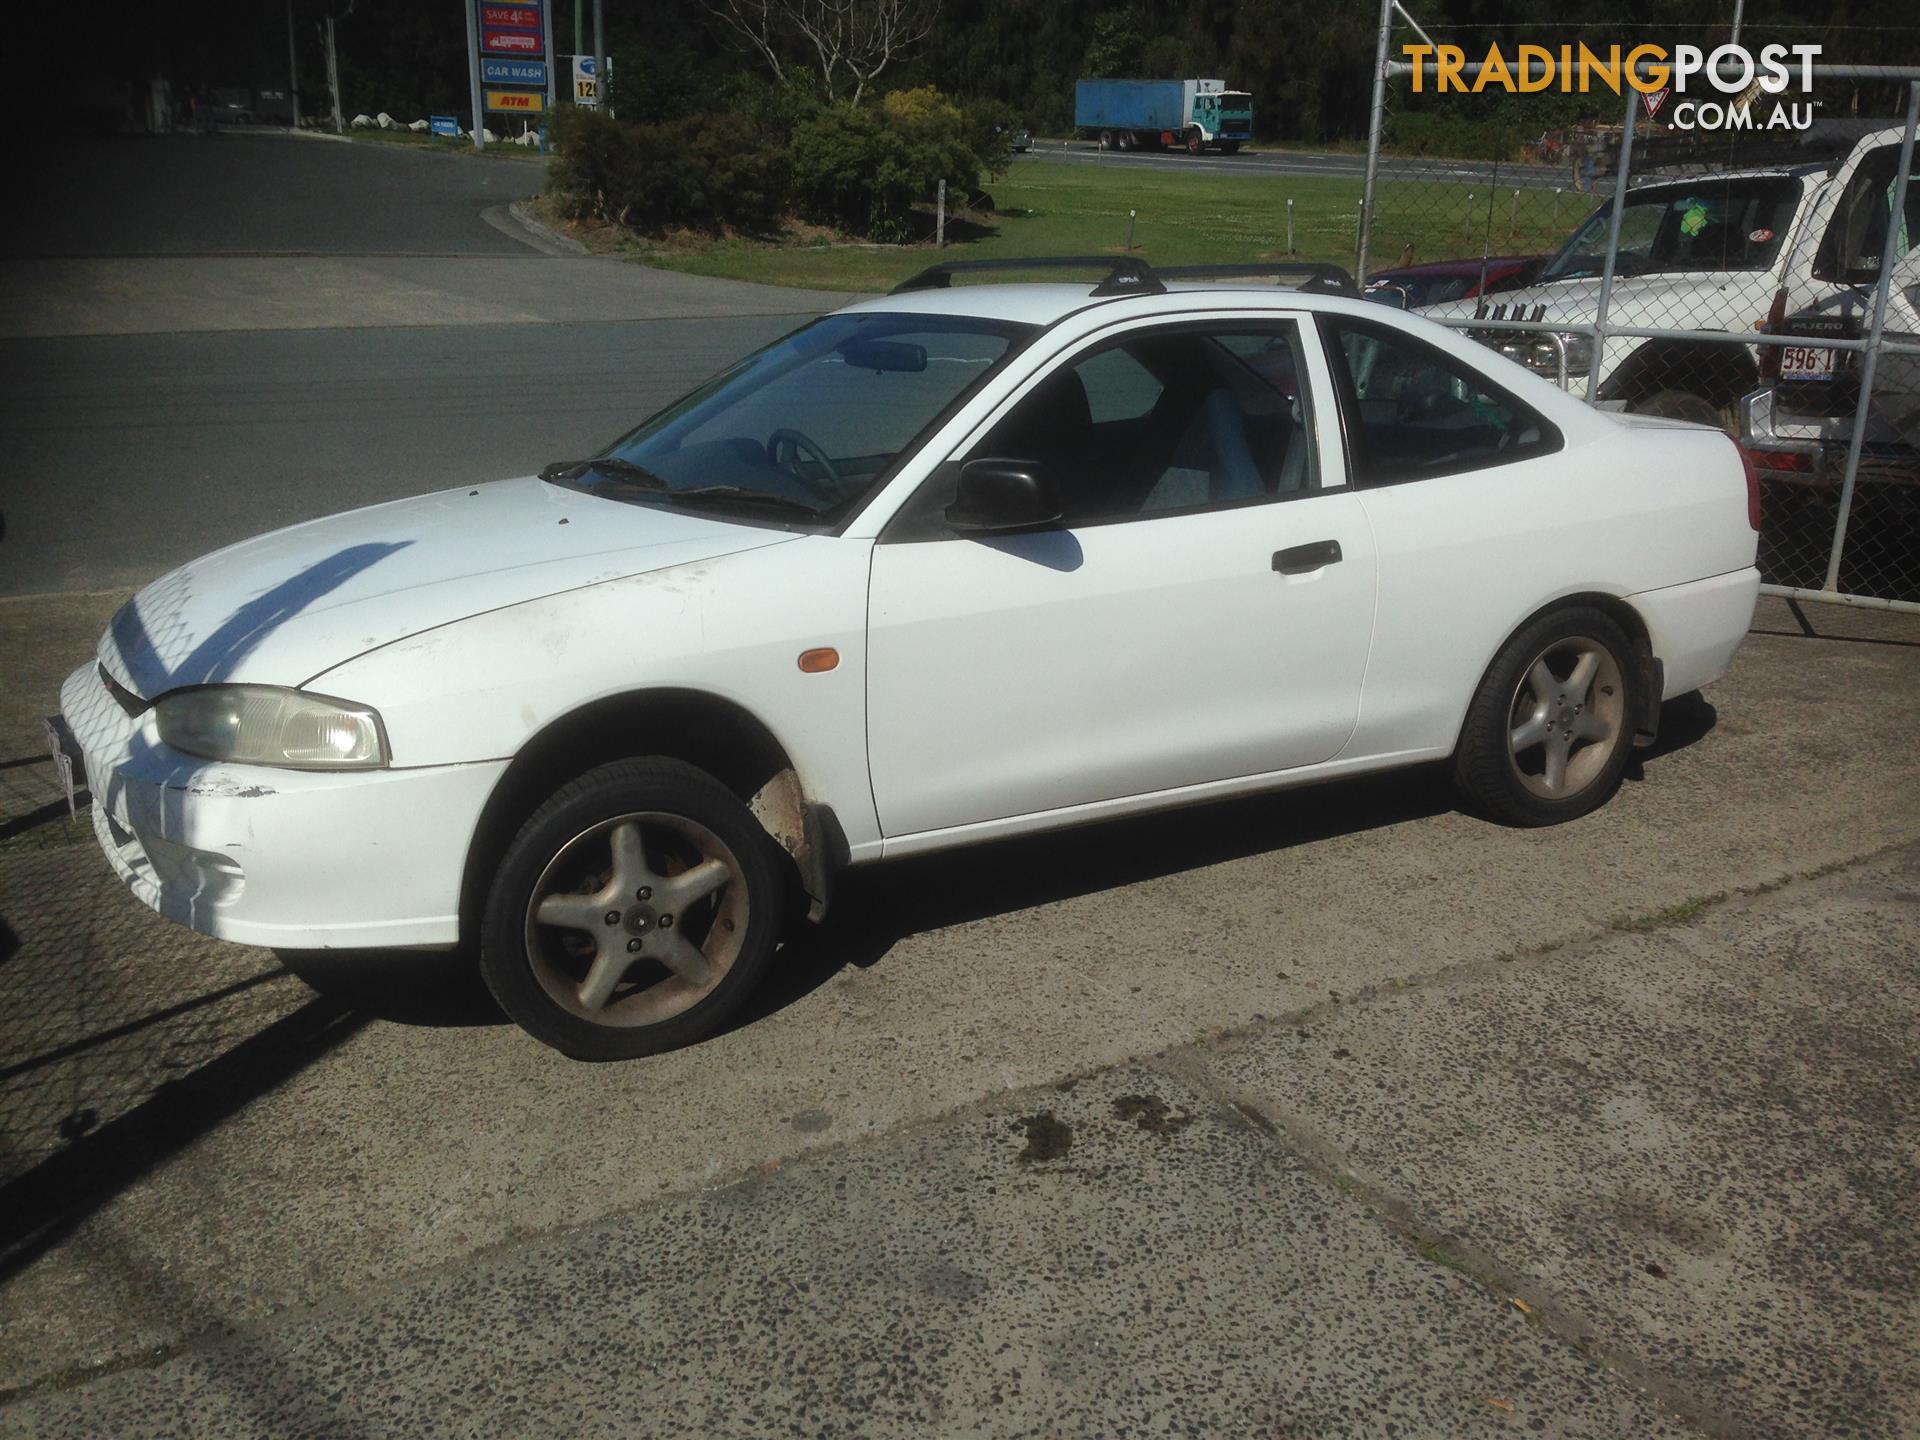 7/99 Mitsubishi Lancer Ce Coupe manual 1.5 POWER STEER PUMP A1005